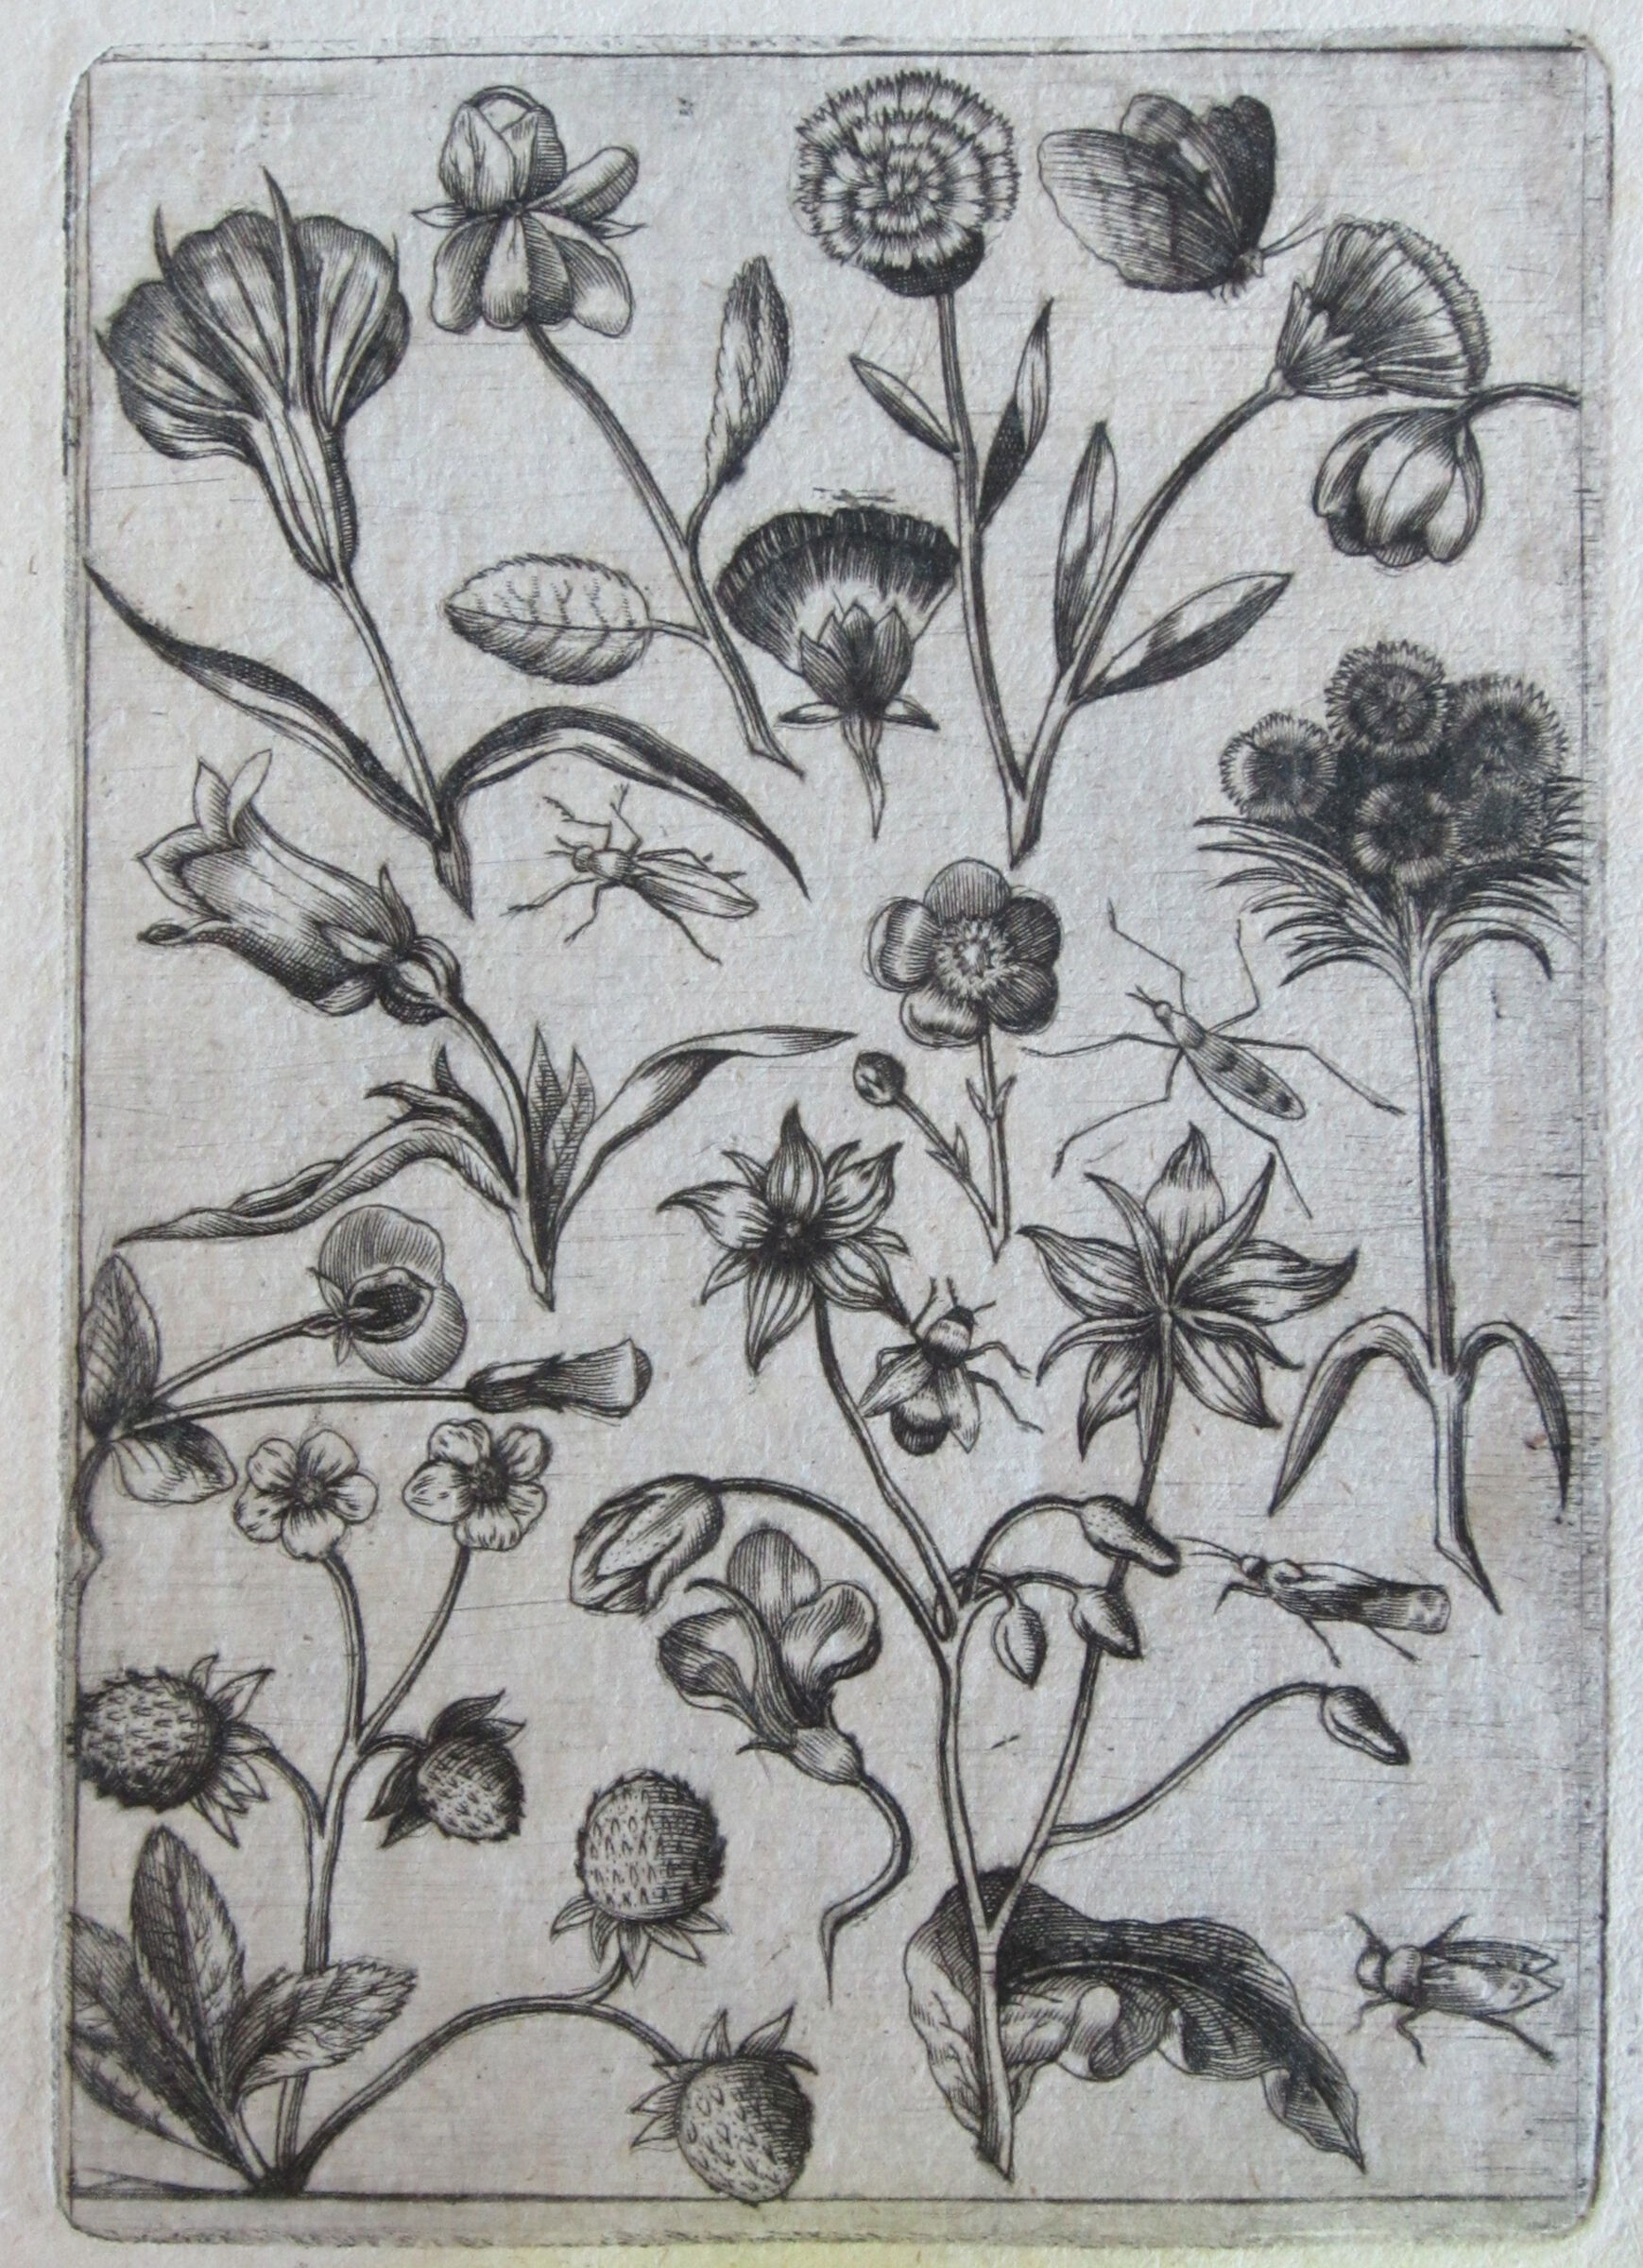 Flowers, Fruits, And Insects, With A Strawberry Plant At The Lower Left